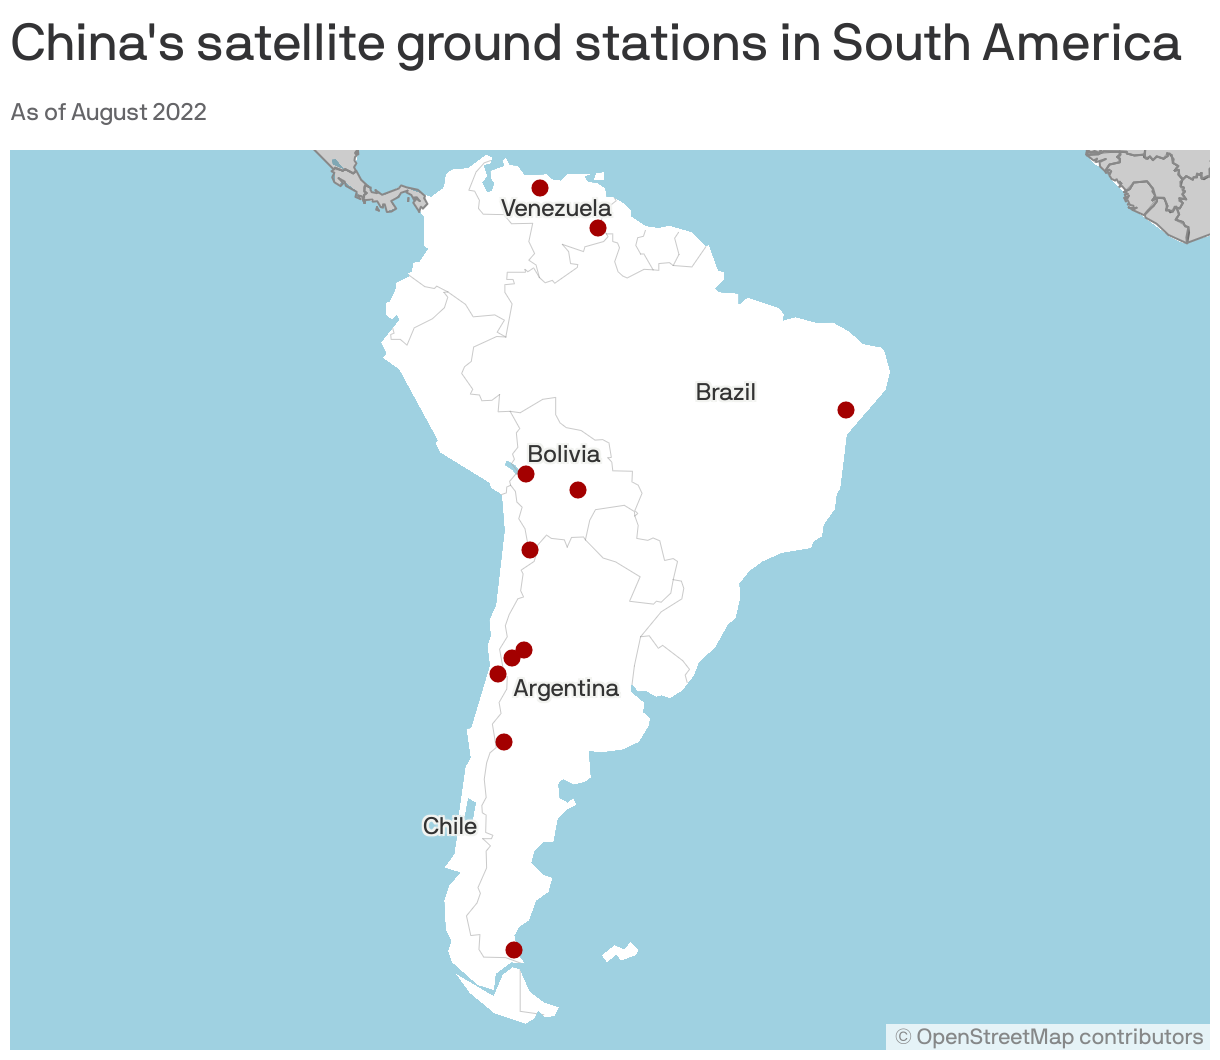 China's satellite ground stations in South America